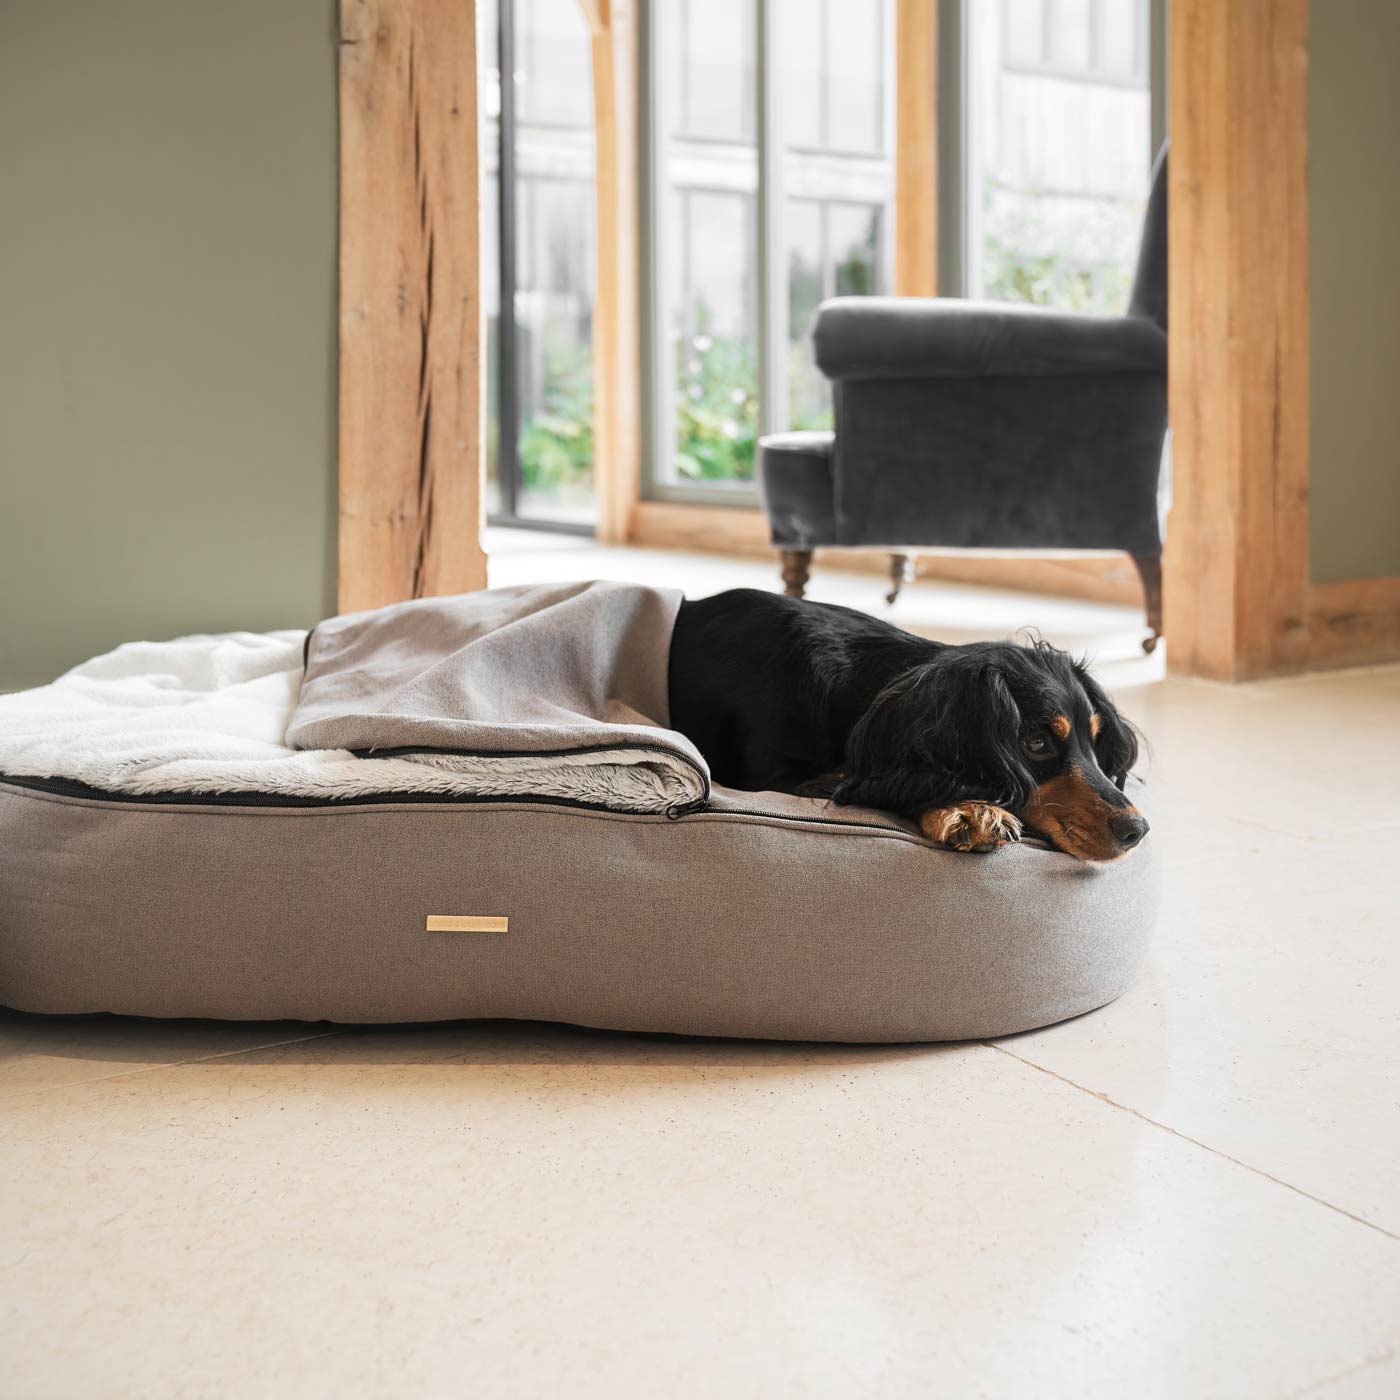 Present Your Furry Friend with the Perfect Dog Bed for The Ultimate Pet Nap-Time! Discover Our Luxury Dig & Dive Dog Bed! Available Now at Lords & Labradors    